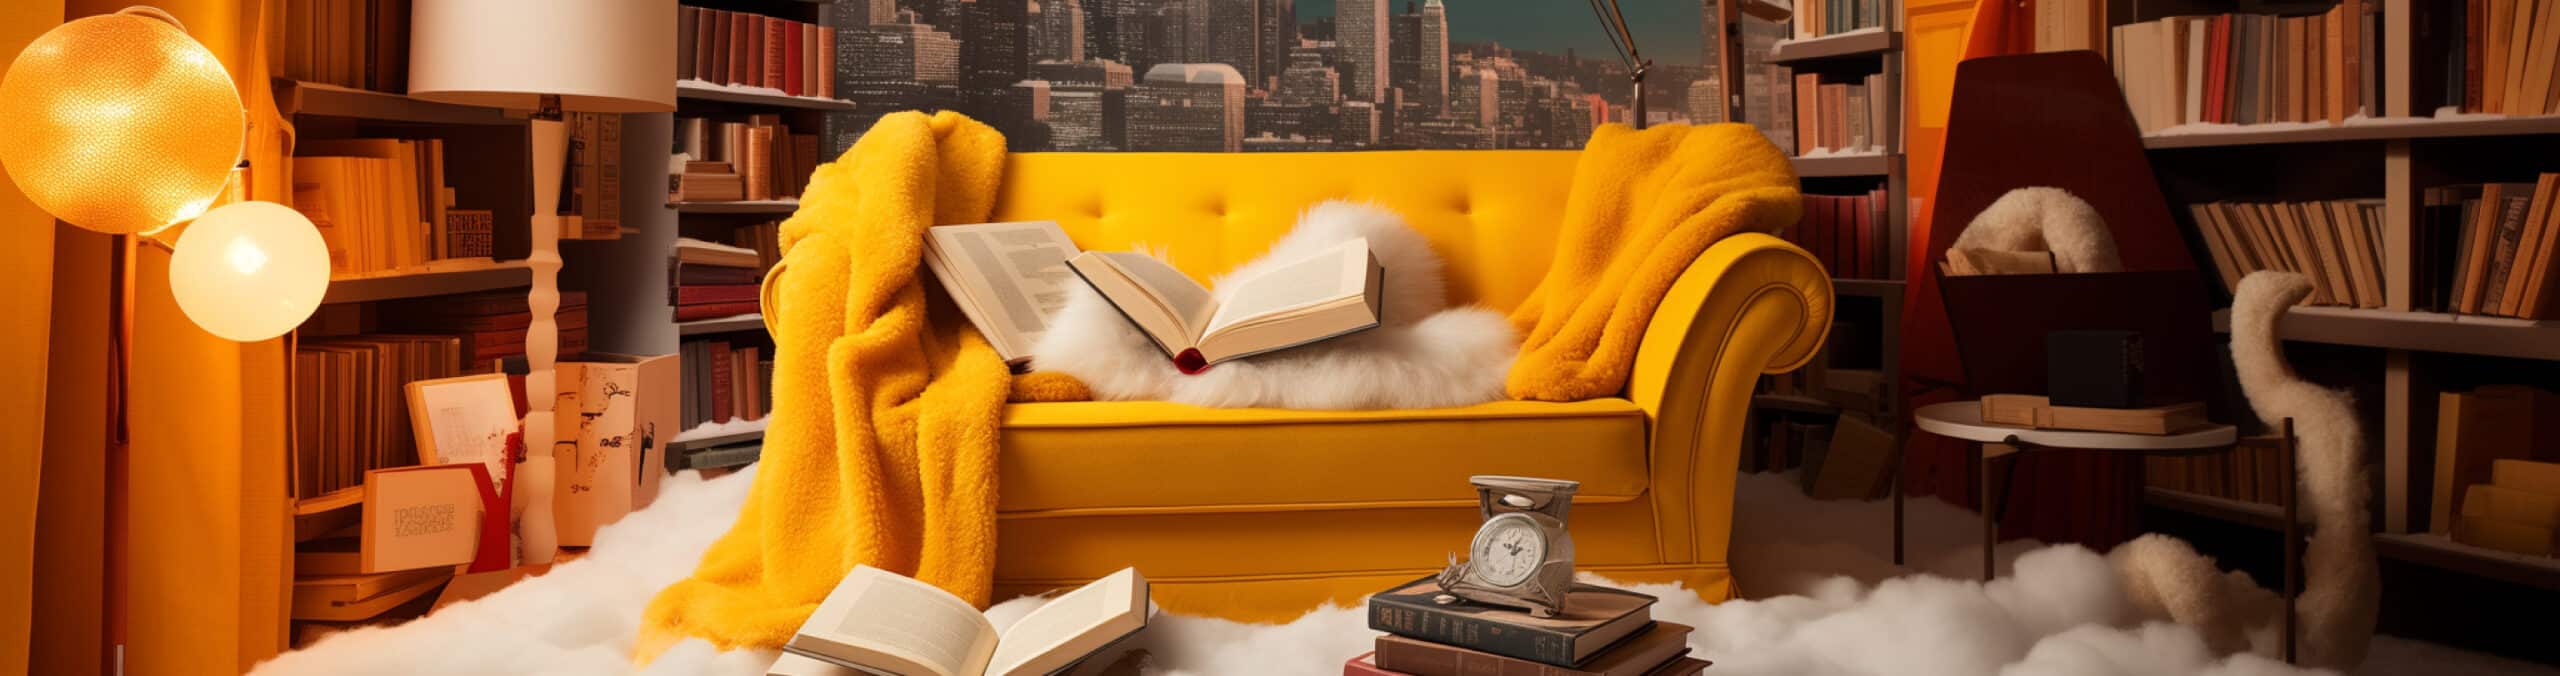 6 signs it’s time to stop reading that book (and that’s OK)